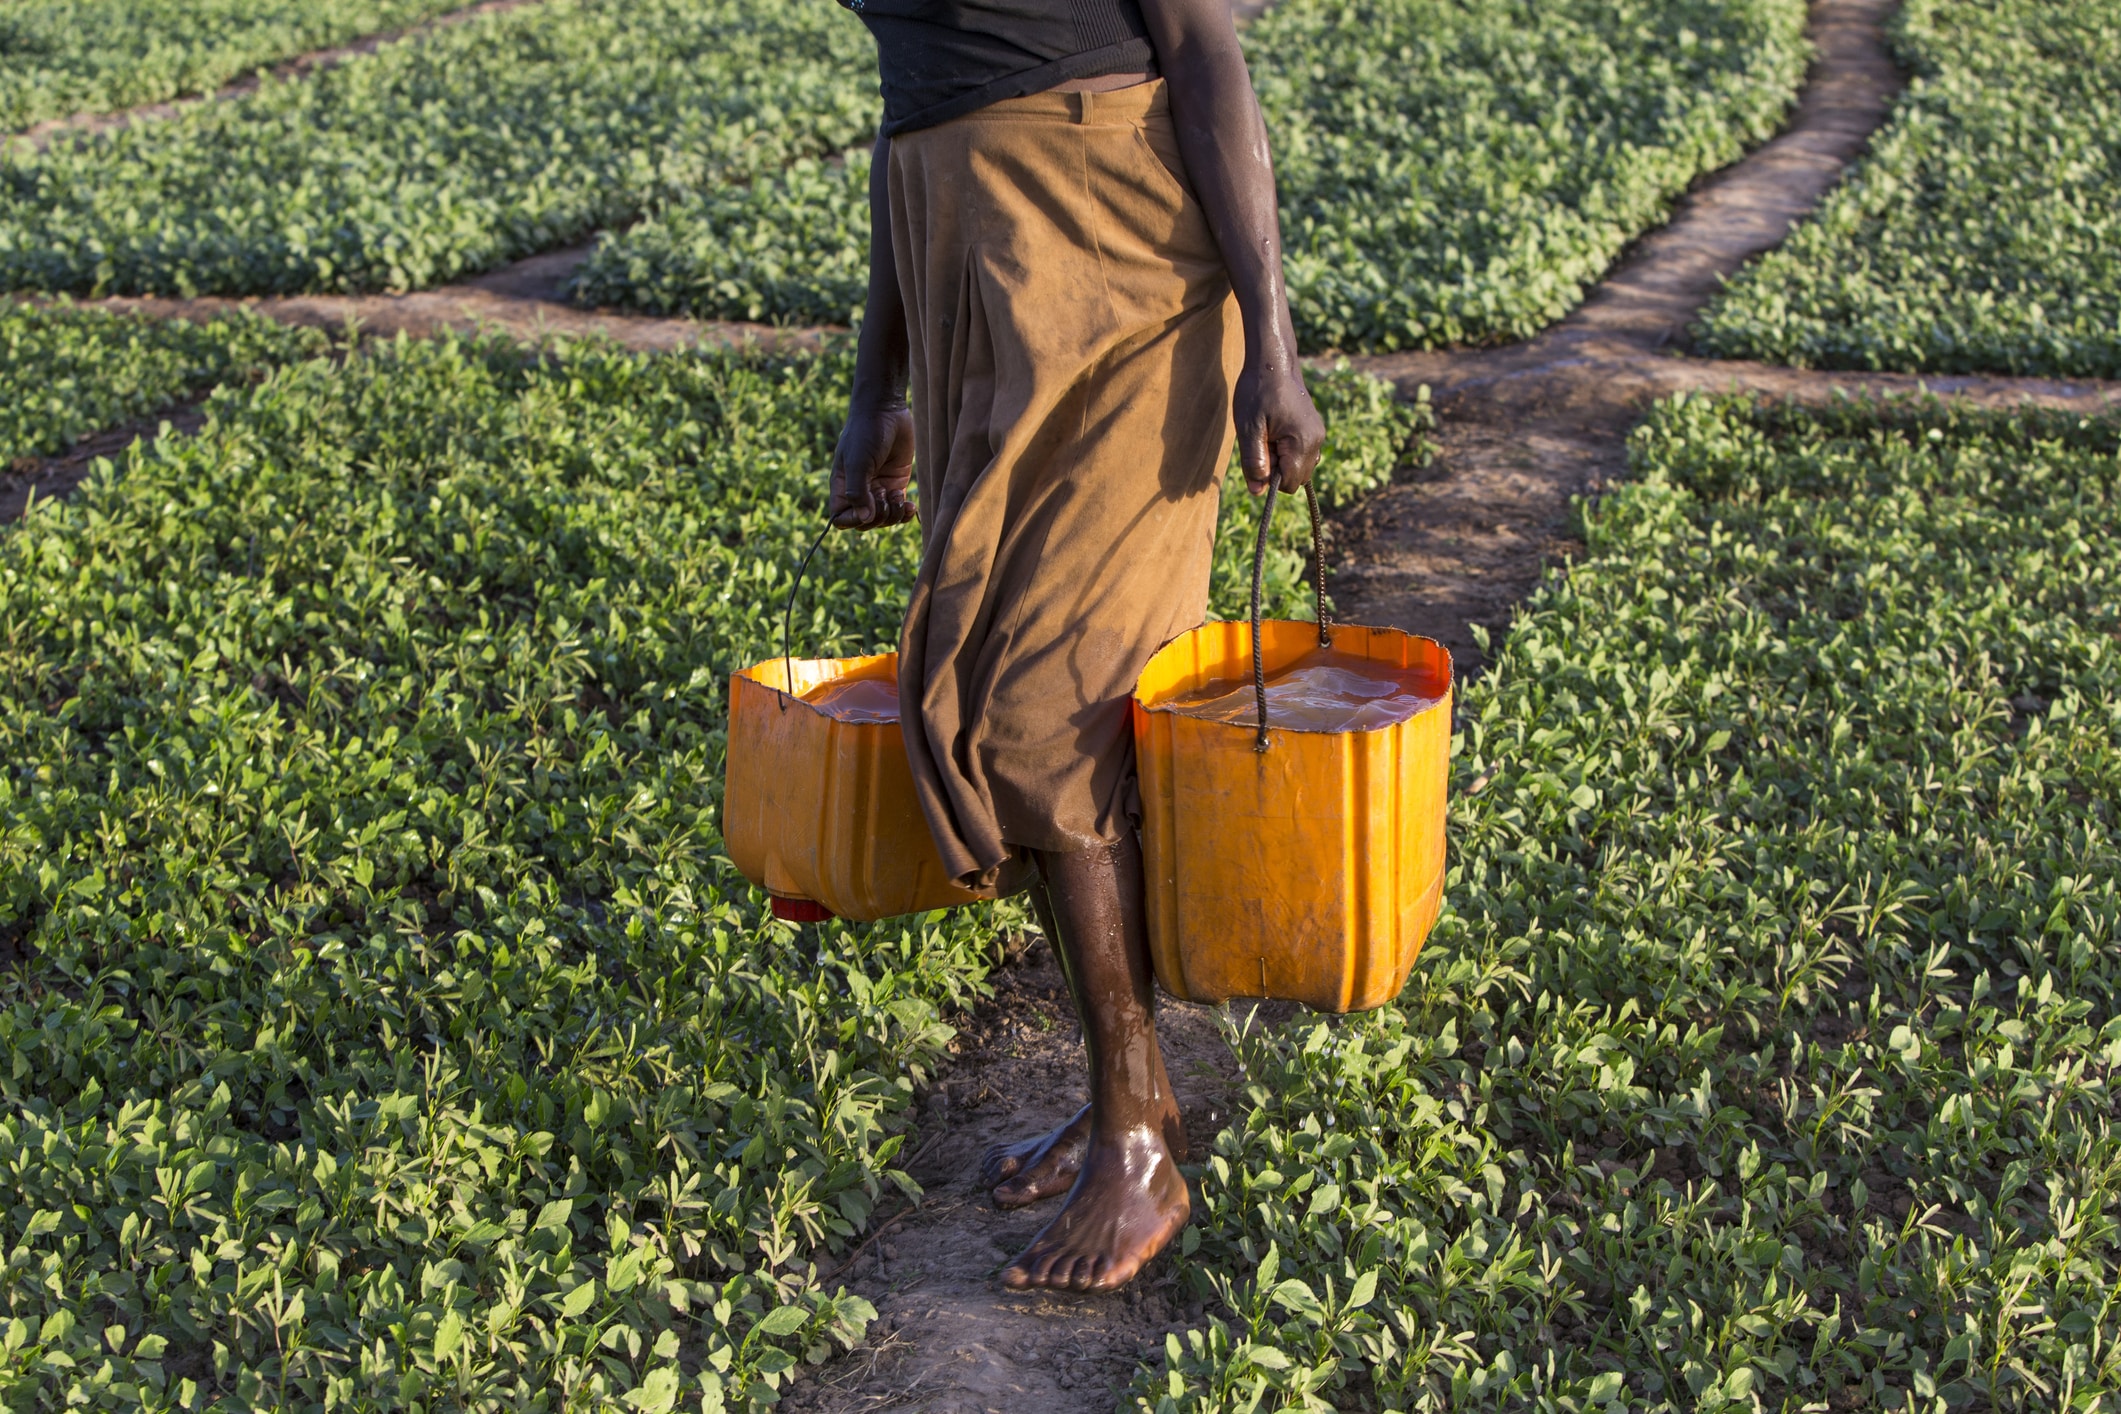 Member of a women’s cooperative carrying buckets to water a field in Karsome, Togo.